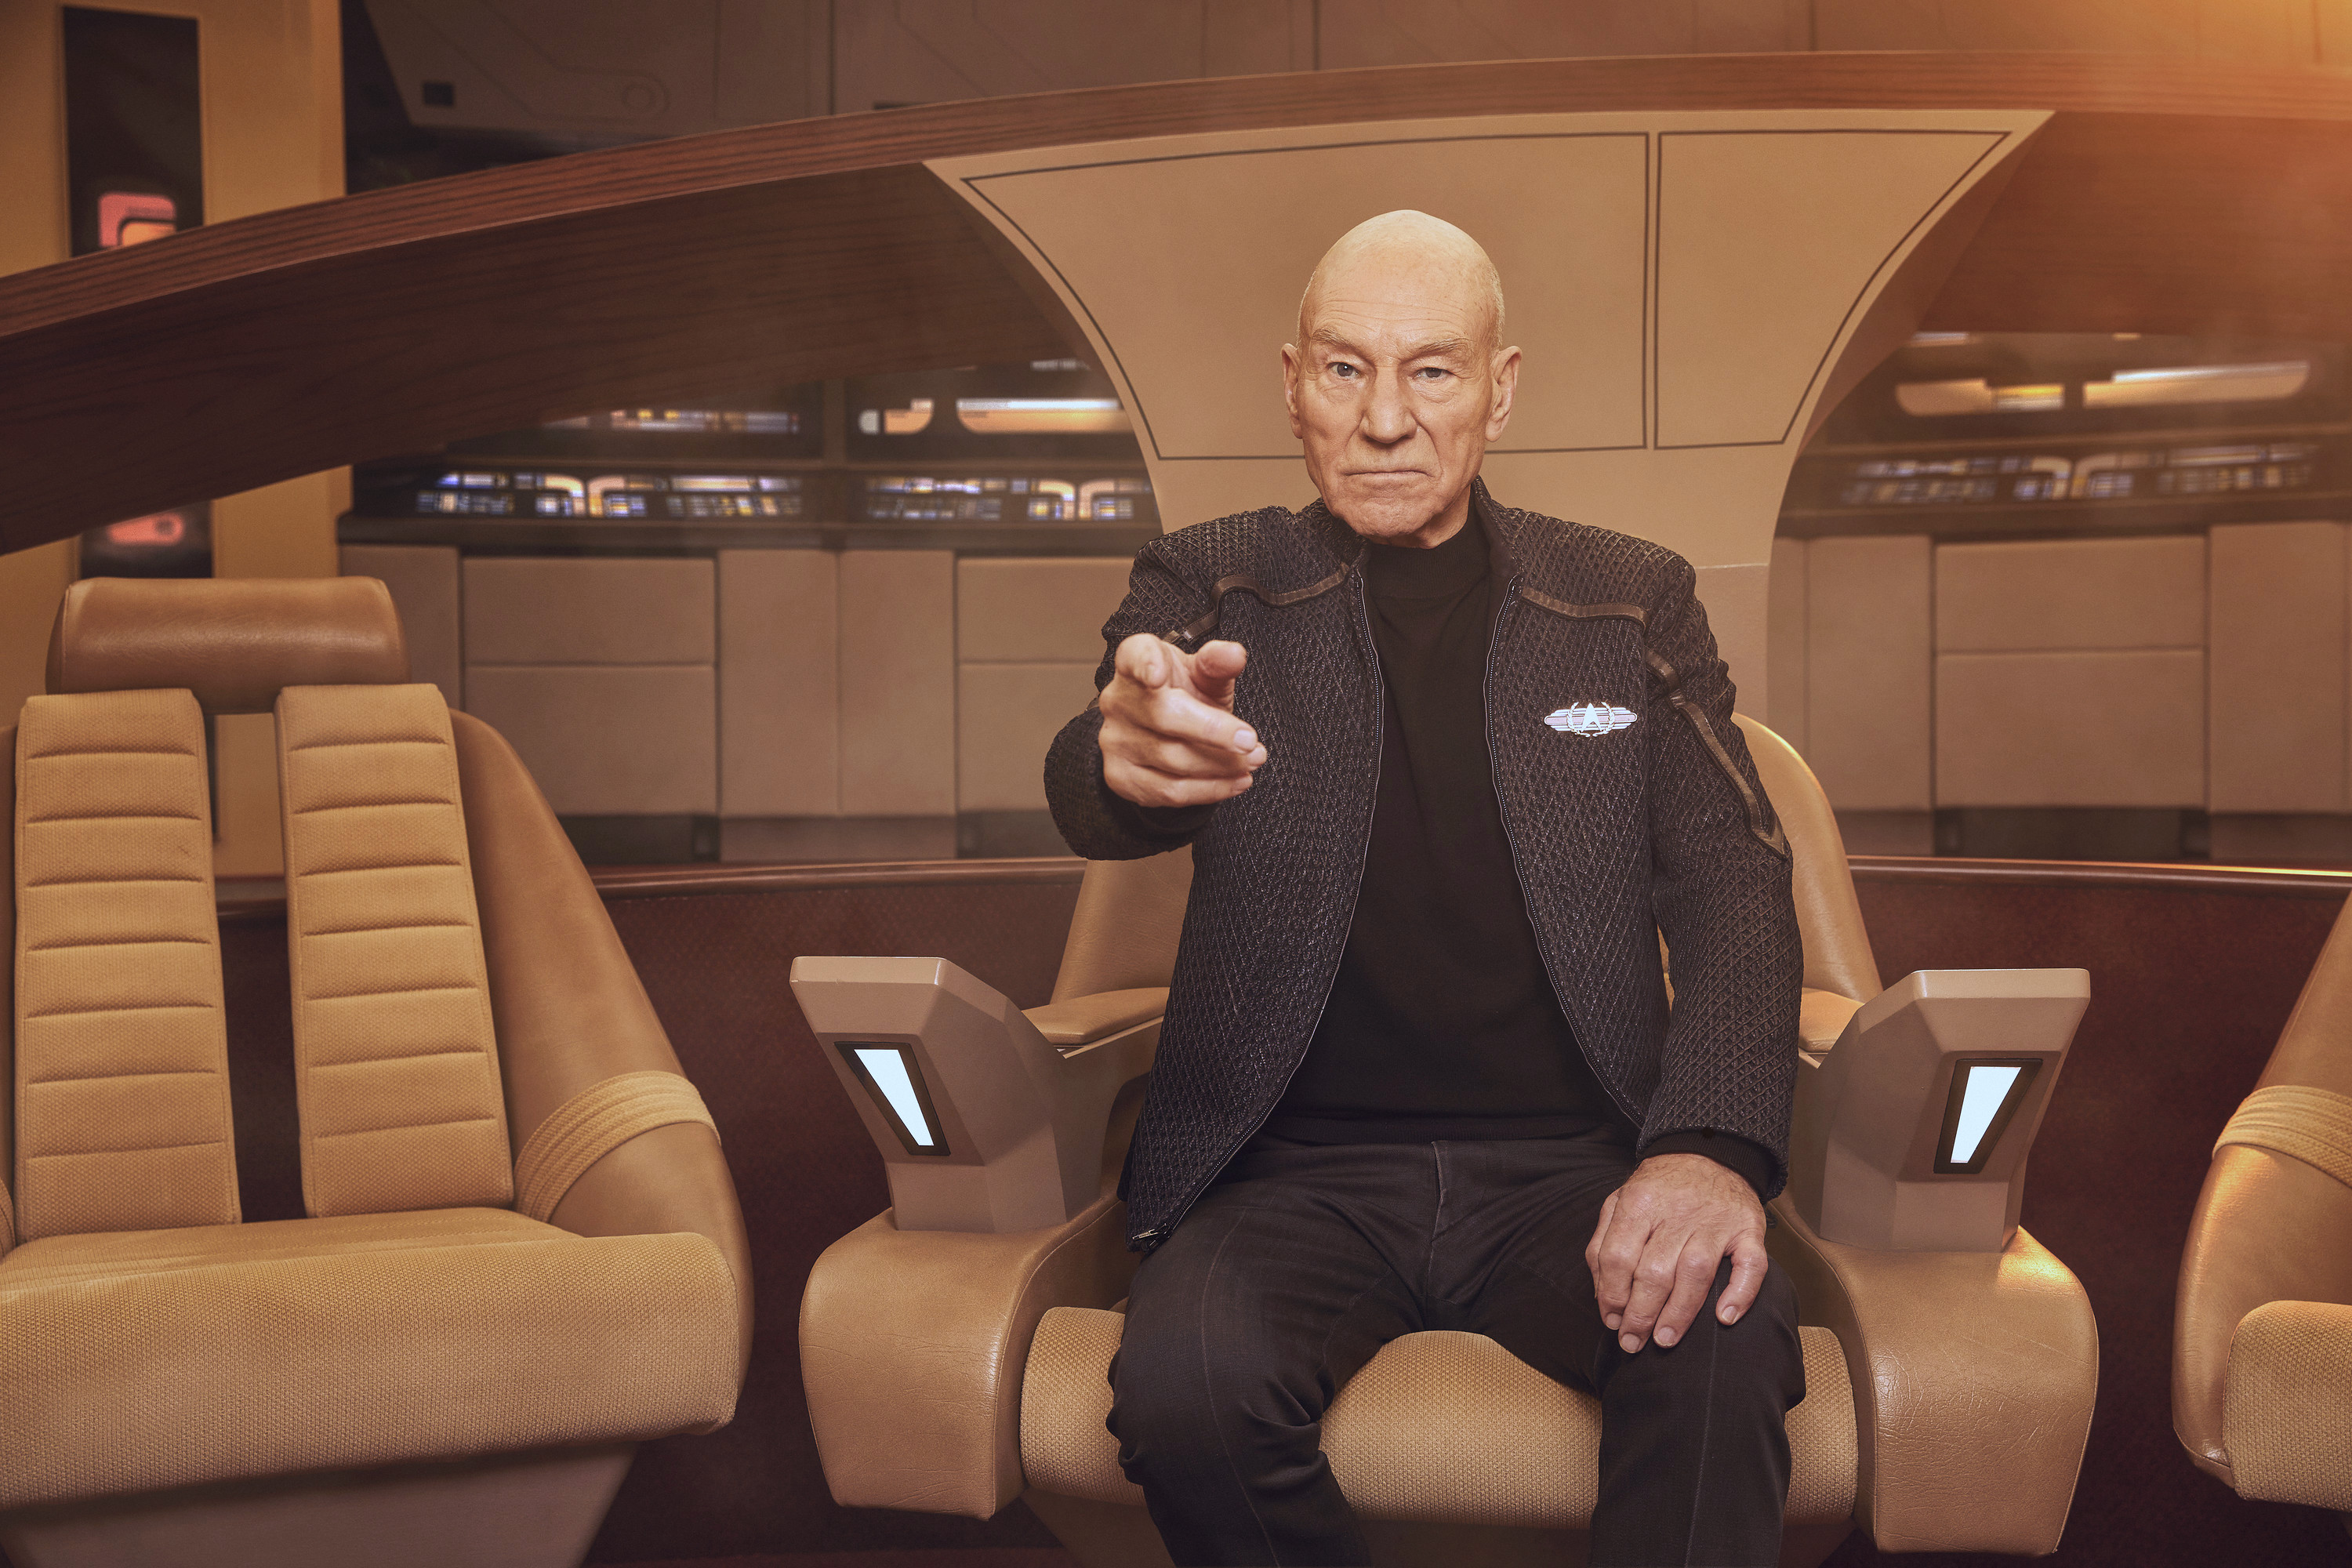 Patrick Stewart as Jean Luc Picard, sitting in his captain’s chair and making his classic “engage” gesture, in Picard.